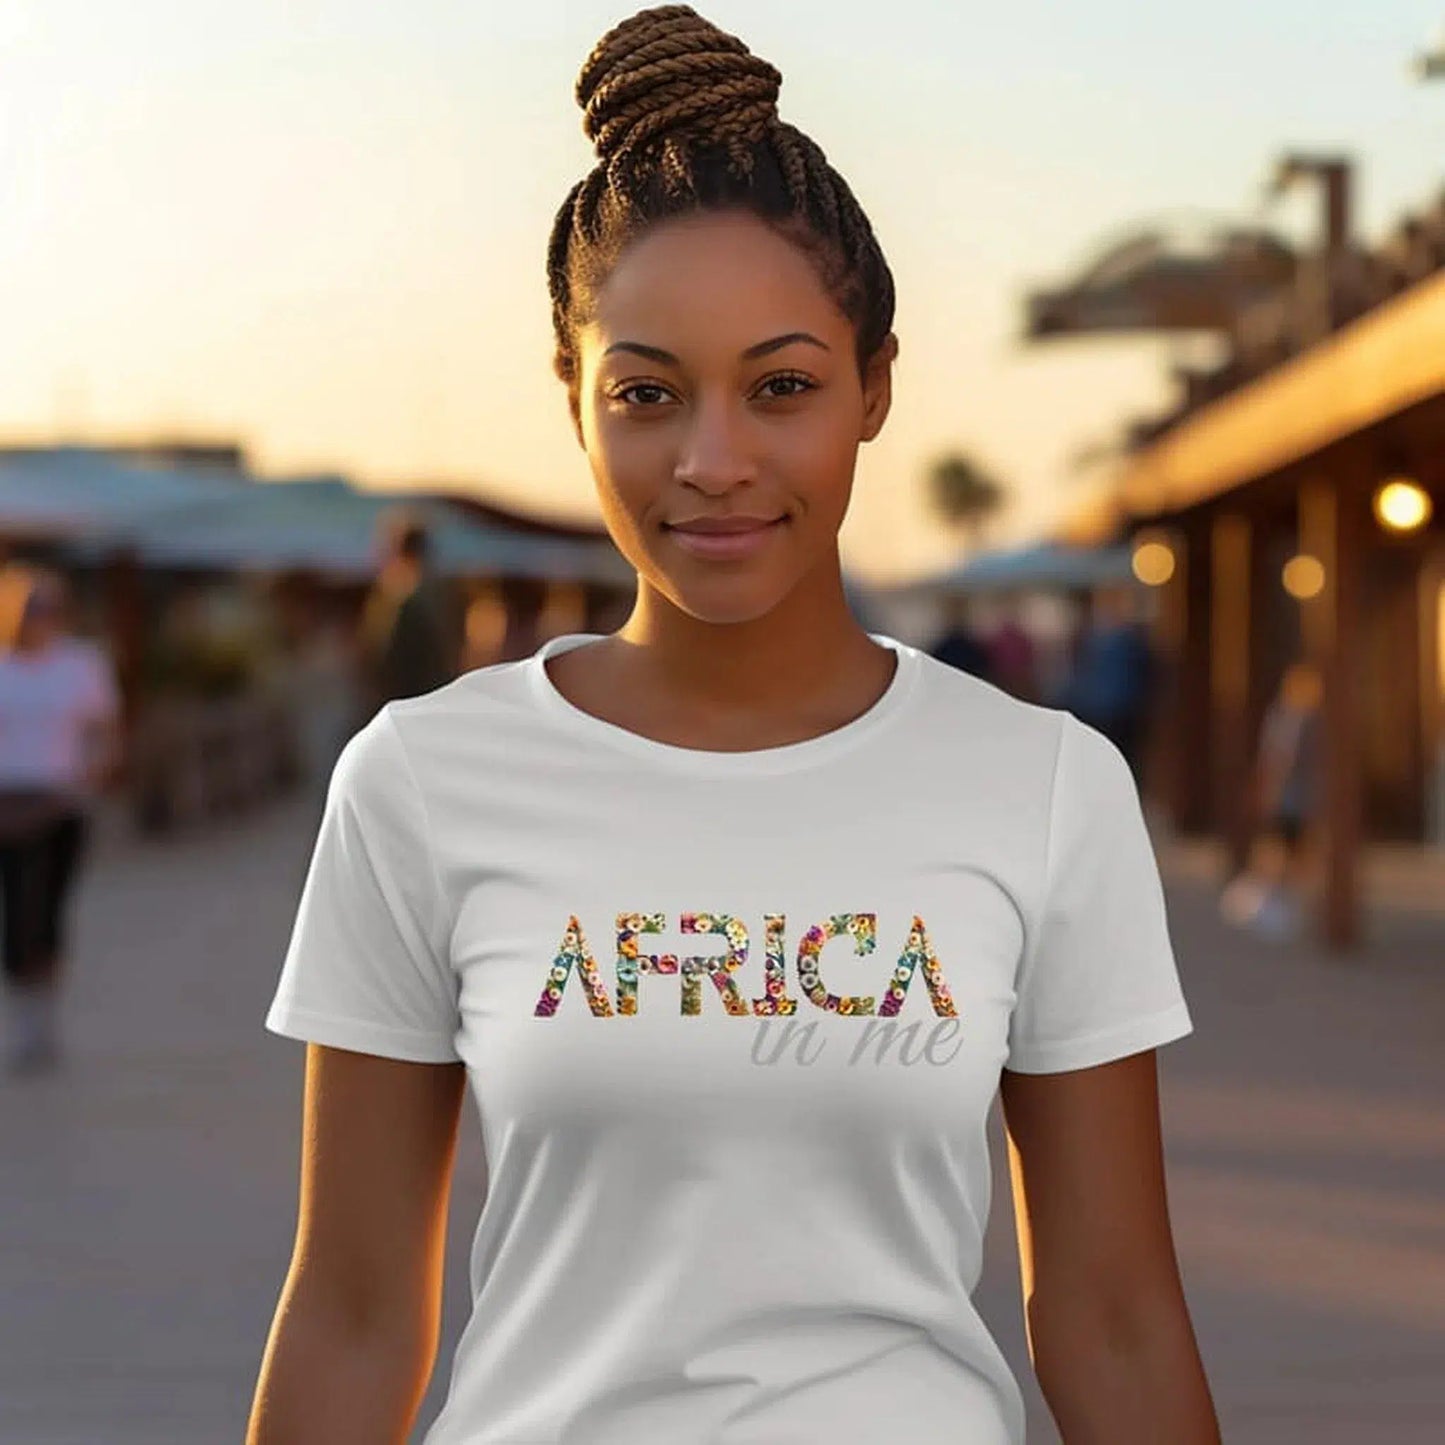 Black History T shirts |Africa in me Flowers T Shirt